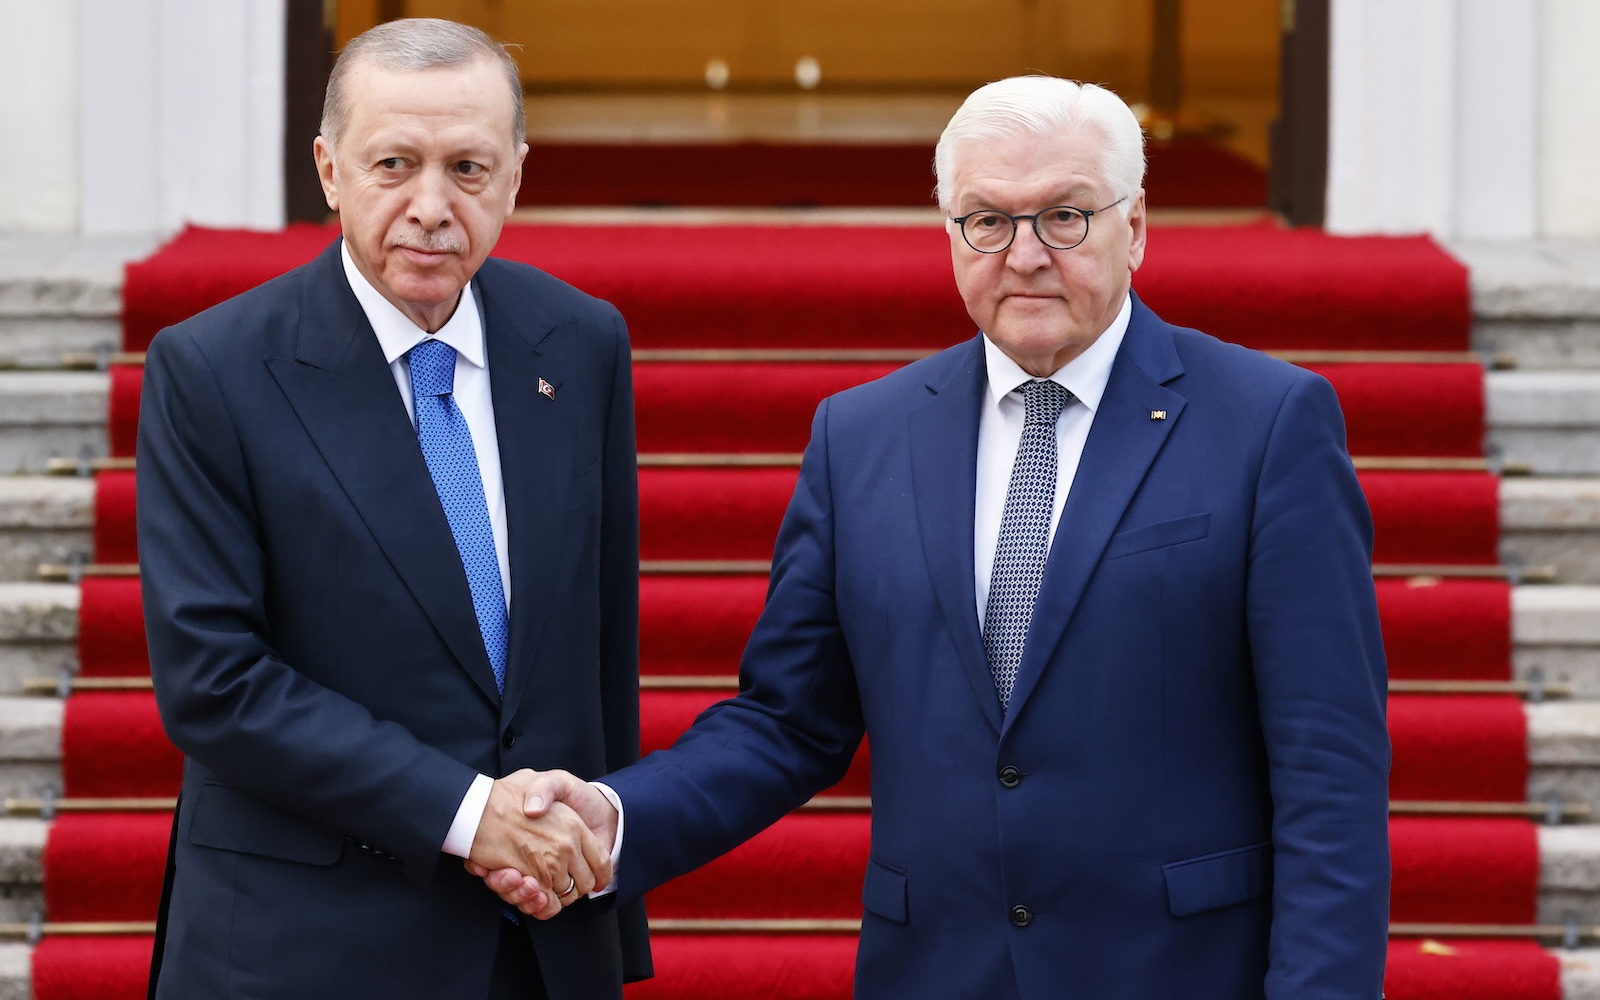 epa10980712 German President Frank-Walter Steinmeier (R) welcomes Turkish President Recep Tayyip Erdogan at Bellevue Palace in Berlin, Germany, 17 November 2023. Erdogan is on a two-day visit to Germany, where he will hold talks with Chancellor Scholz and President Steinmeier.  EPA/HANNIBAL HANSCHKE